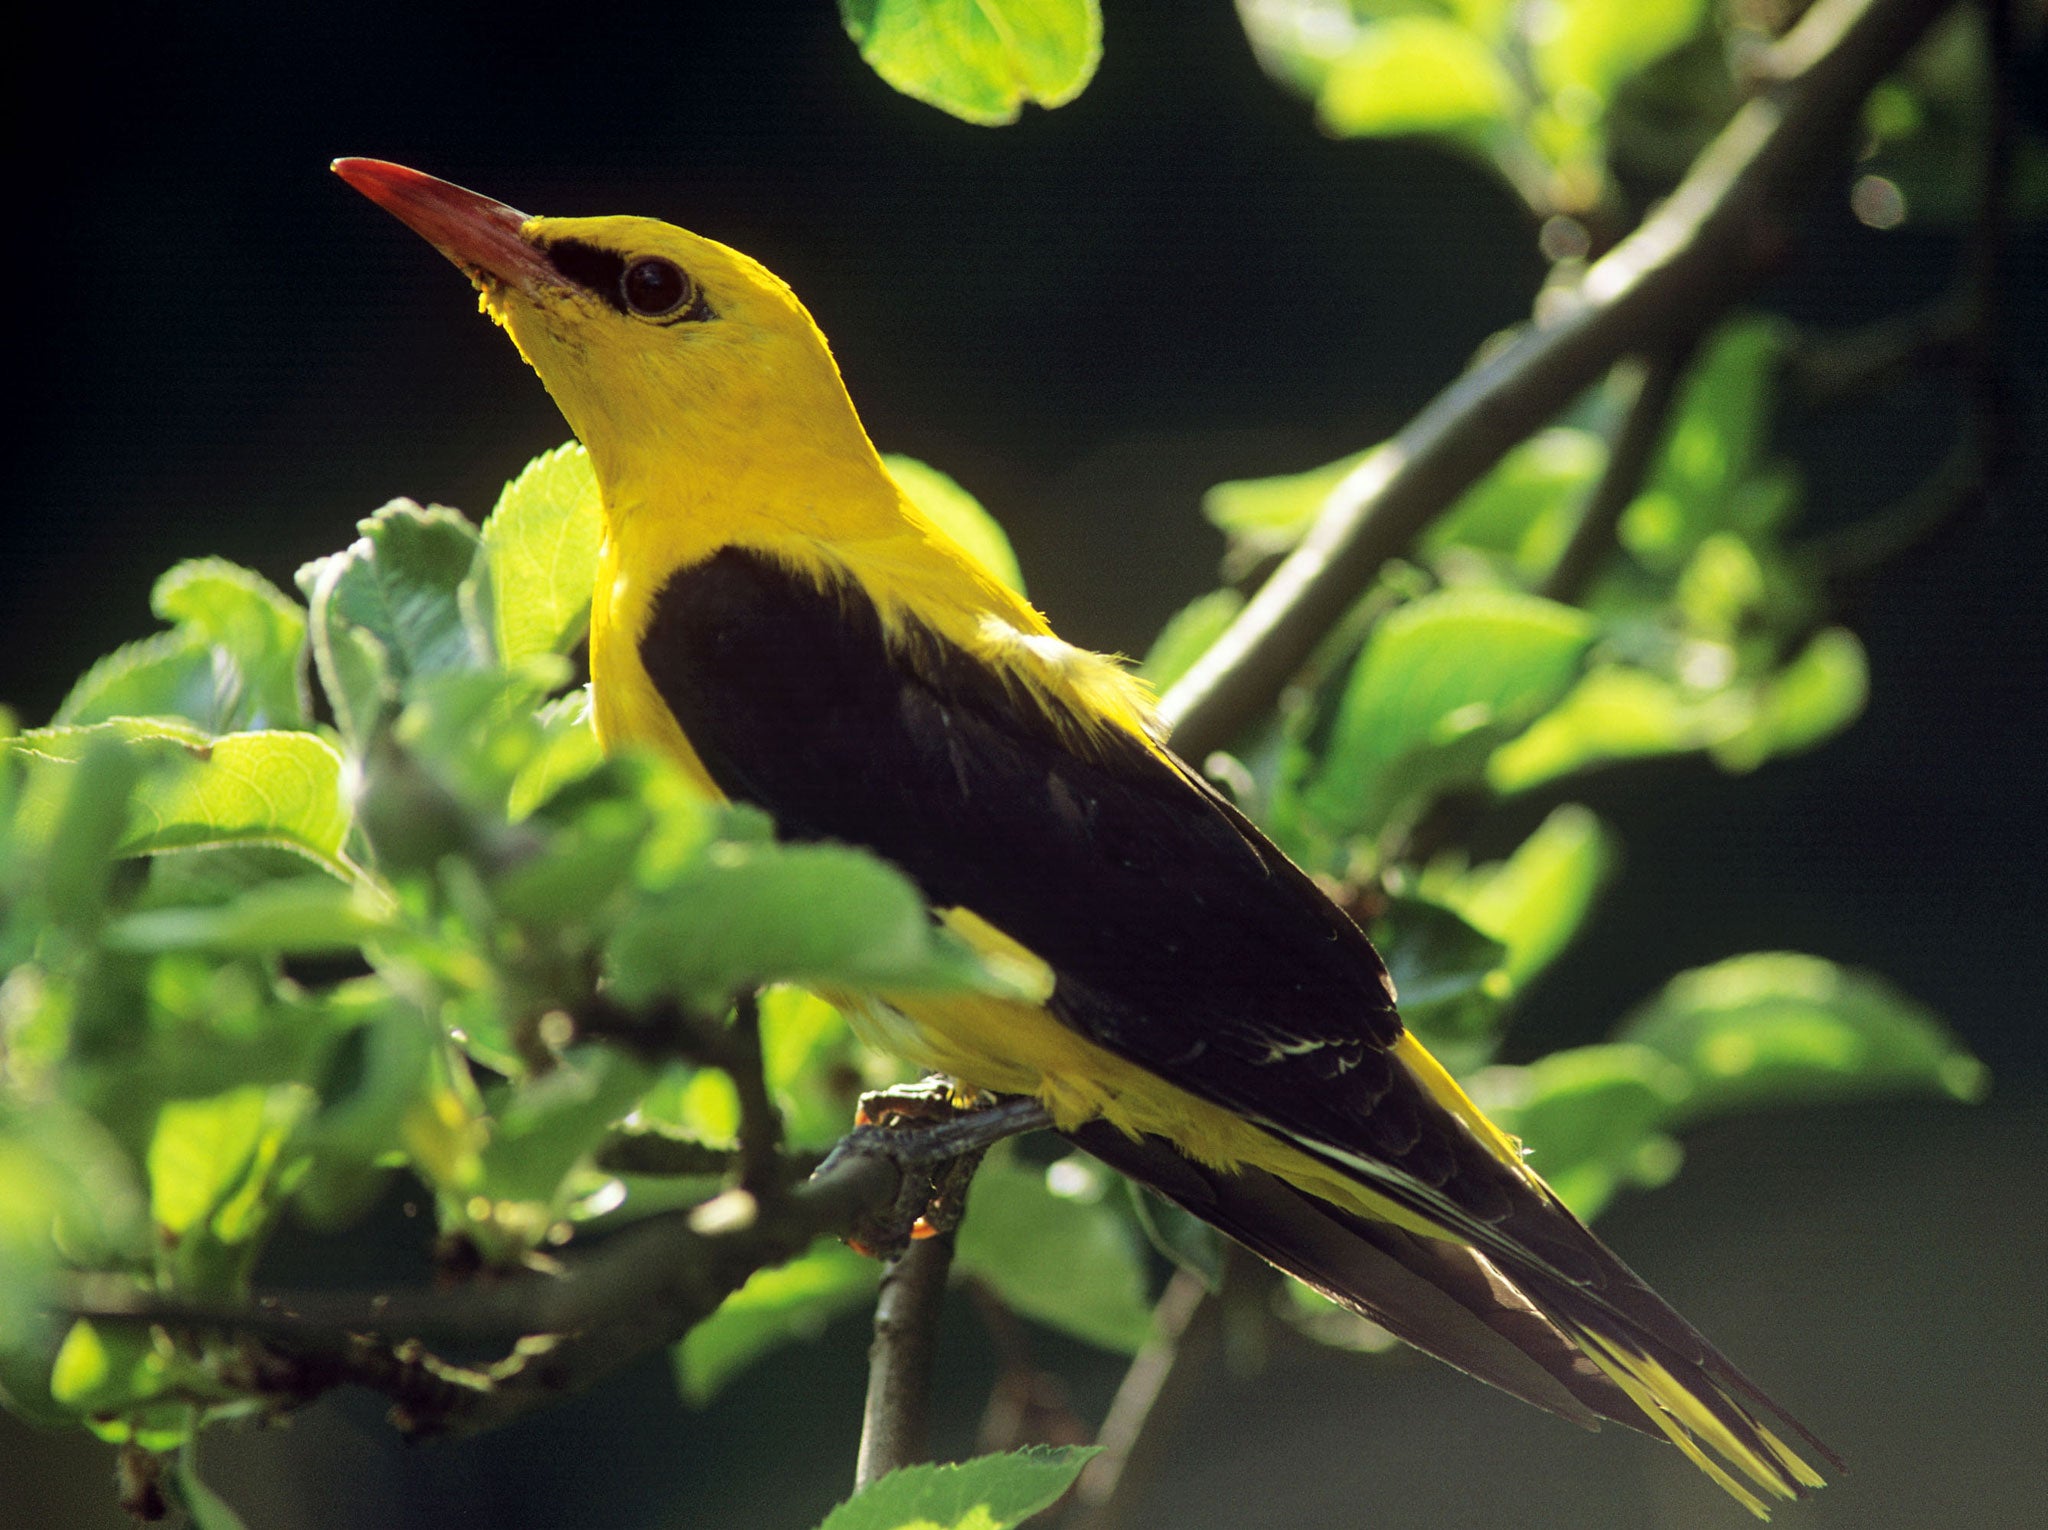 ARJNH6 Oriolus oriolus Golden oriole male sitting on a twig